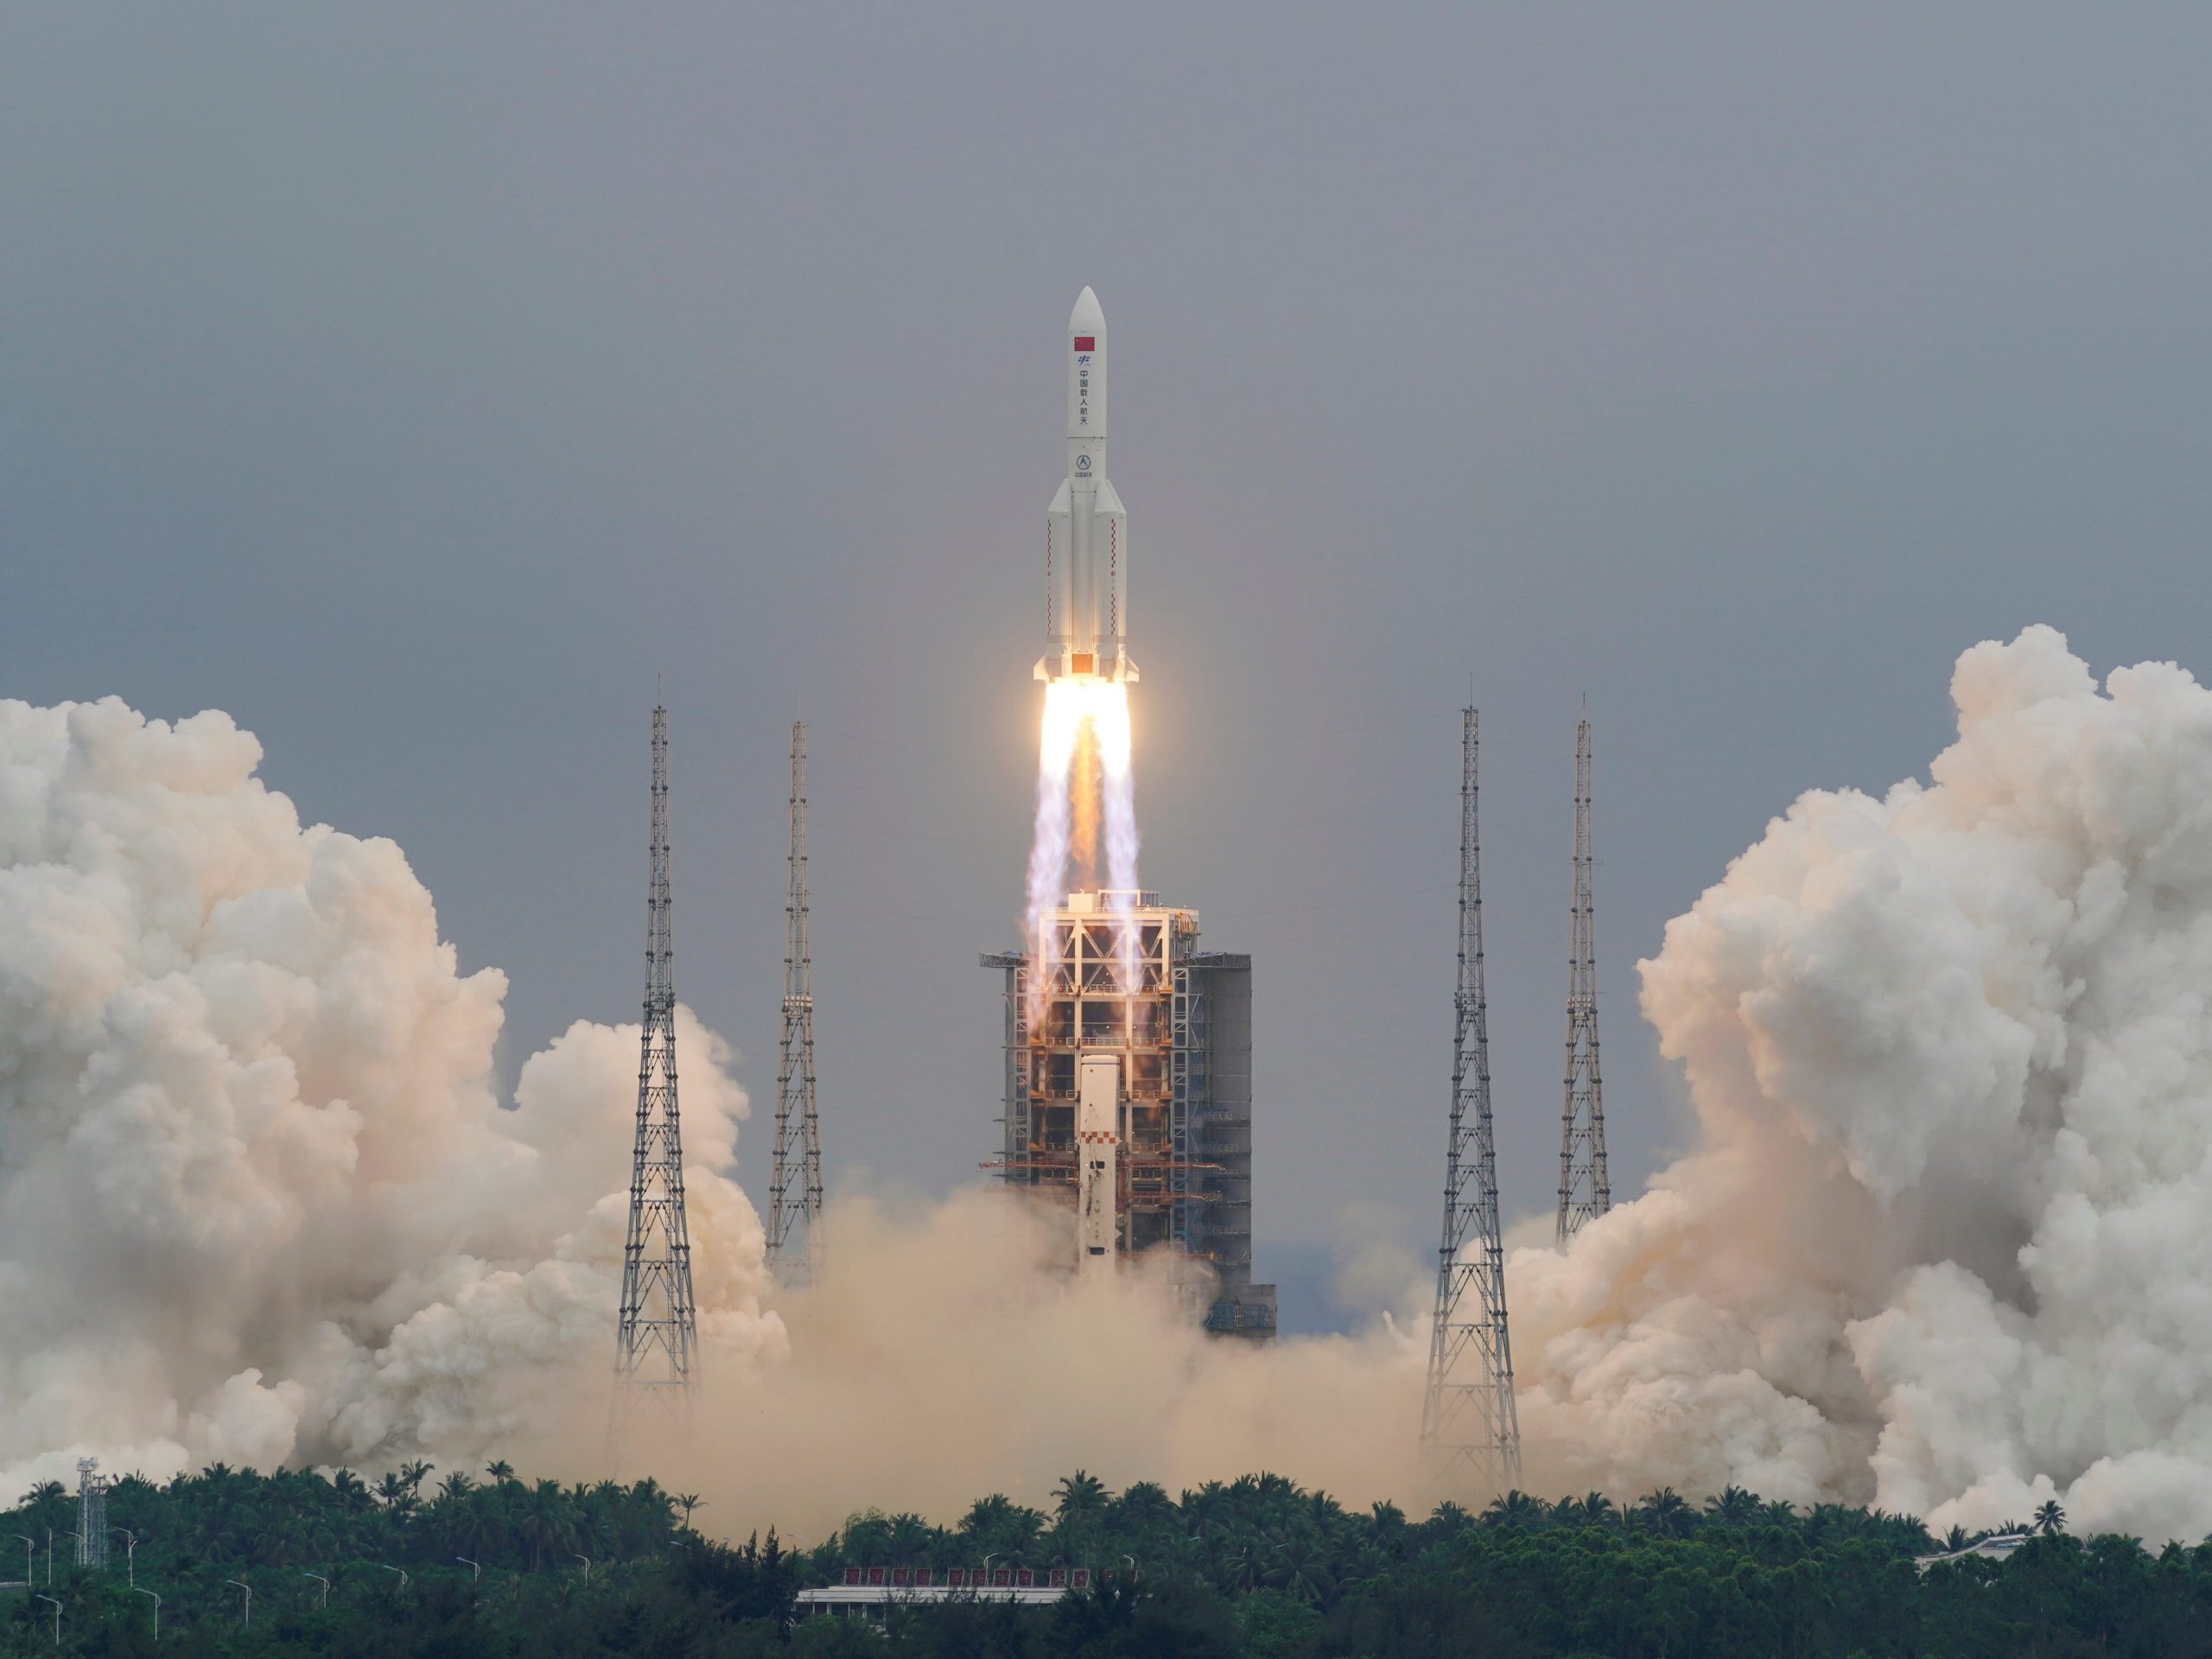 tianhe module launch china space station Long March 5B Y2 rocket